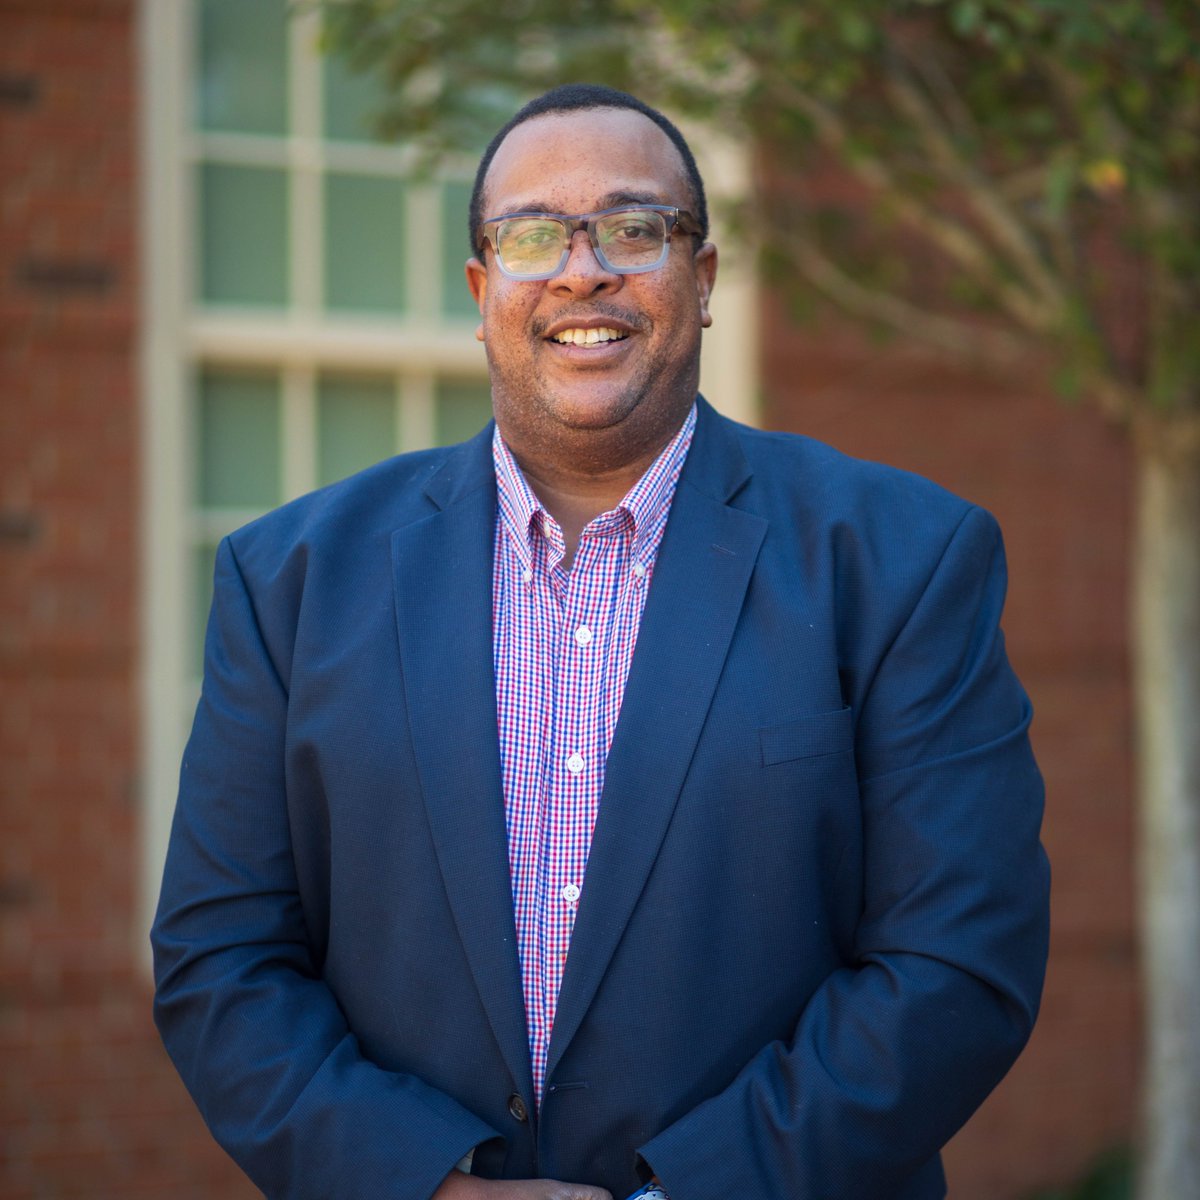 Shoutout to @SamfordU Biological and Environmental Sciences chair Anthony Overton for being elected president of the Southern Division of the American Fisheries Society! 👏 Read more: bit.ly/3UqYSXz